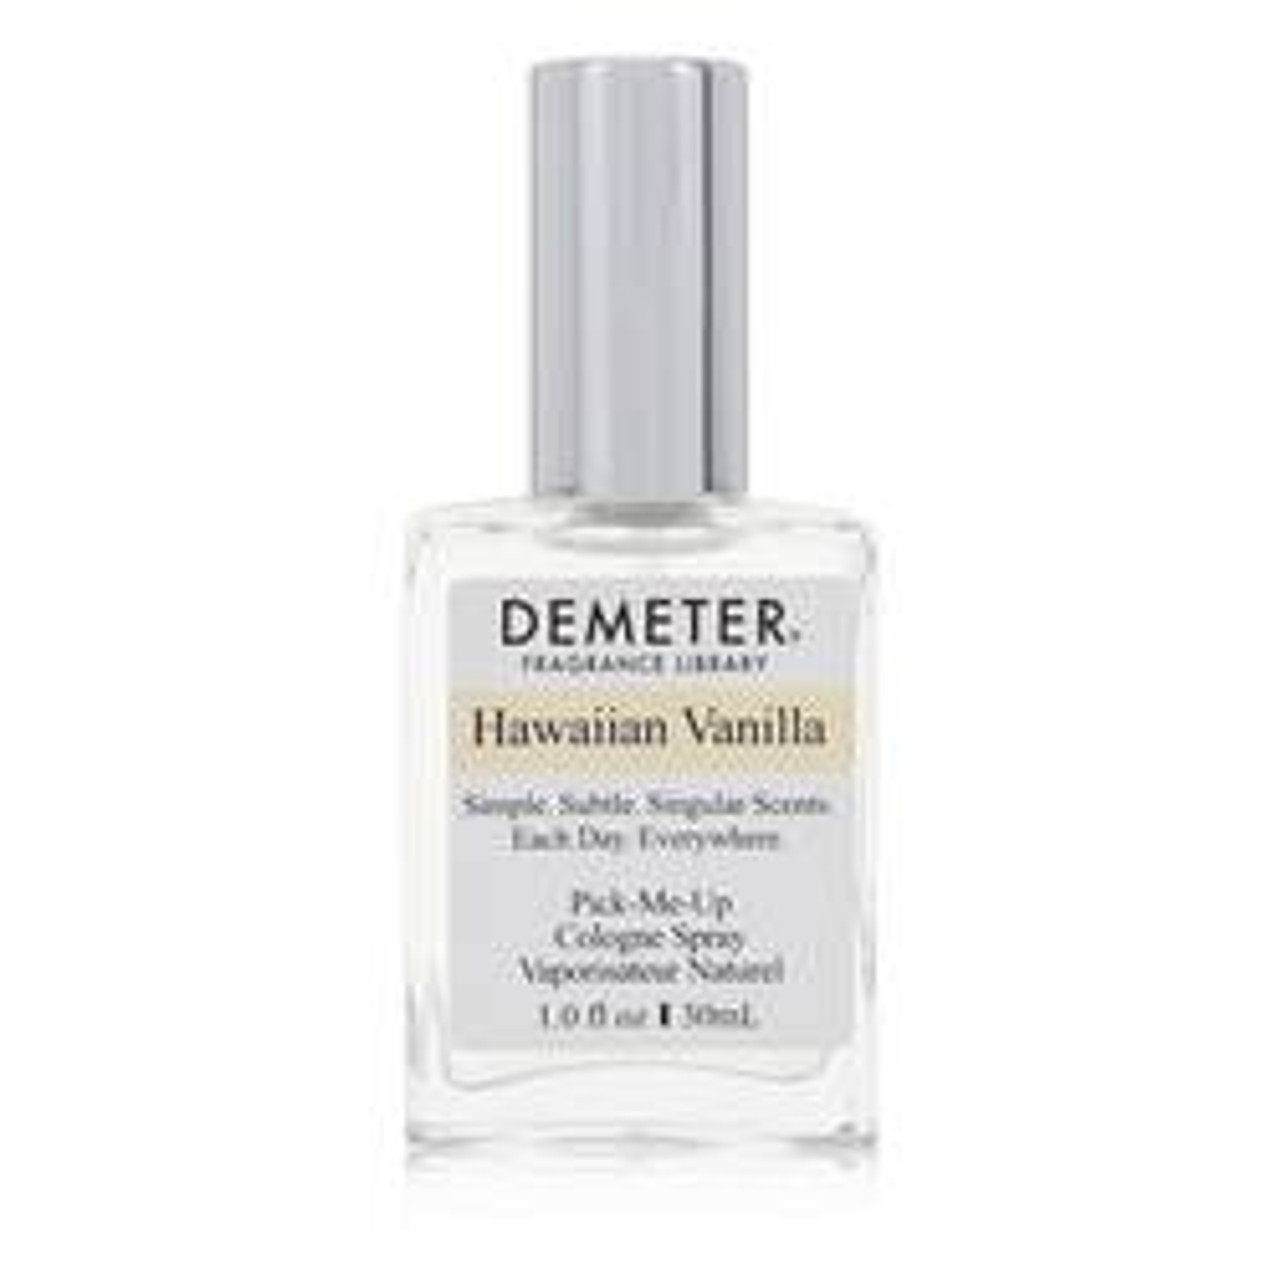 Demeter Hawaiian Vanilla Perfume By Demeter Cologne Spray 1 oz for Women - [From 35.00 - Choose pk Qty ] - *Ships from Miami